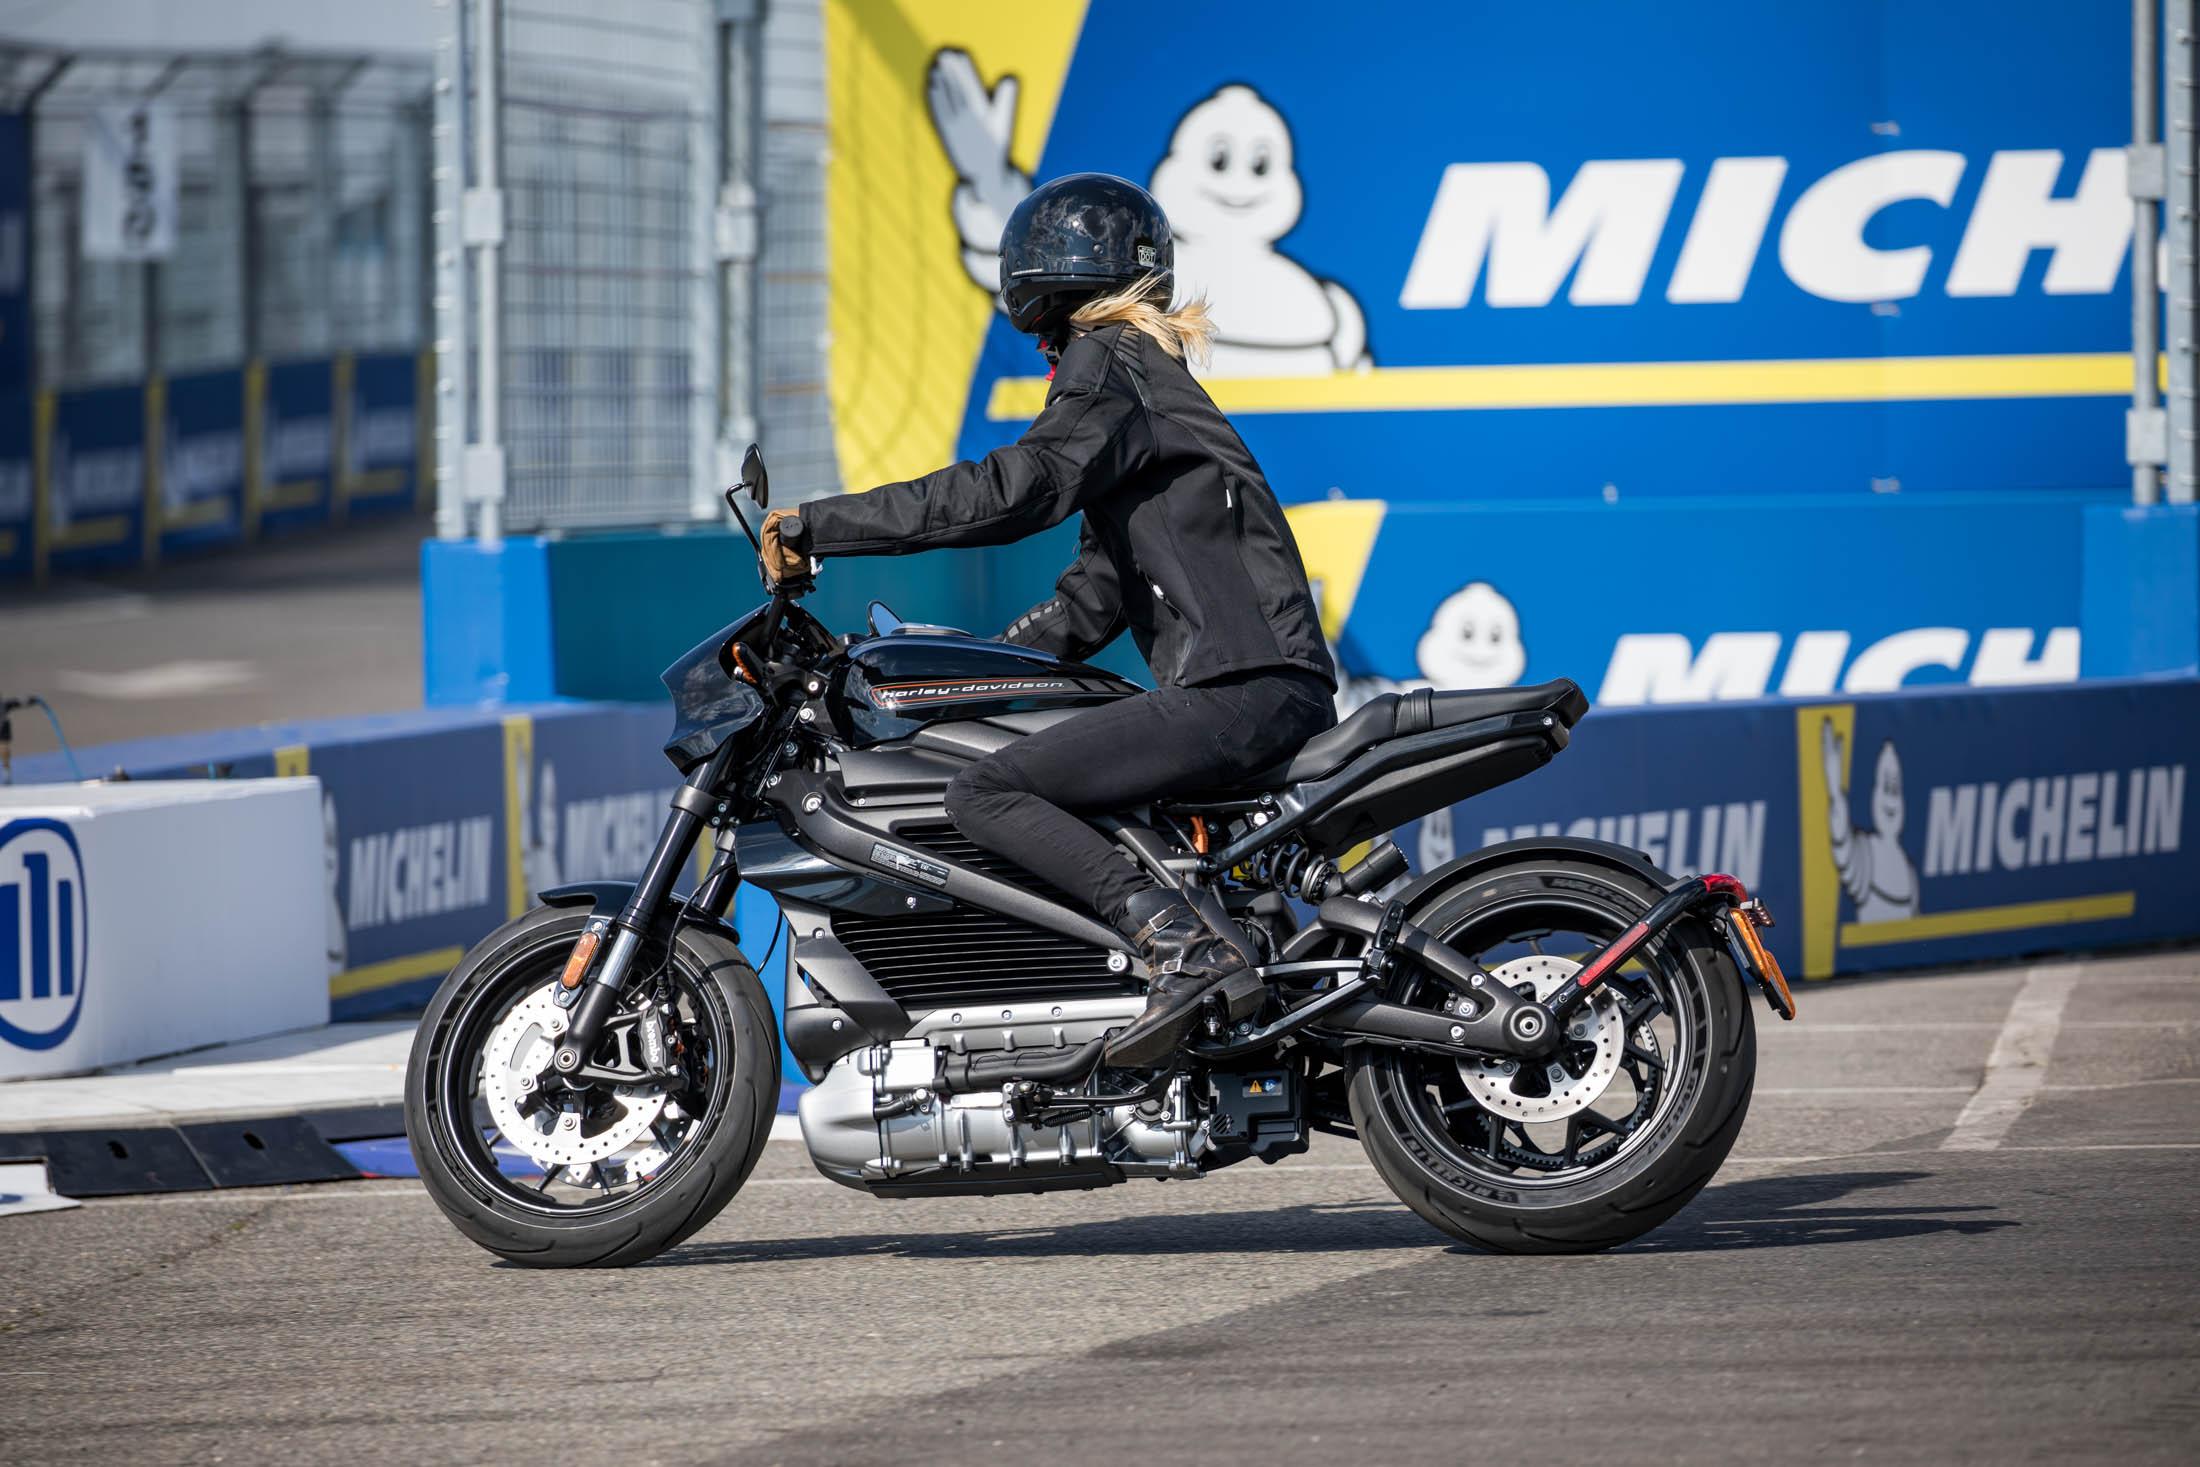 Harley Davidson Livewire Review An Electric Motorcycle For Rider Bloomberg